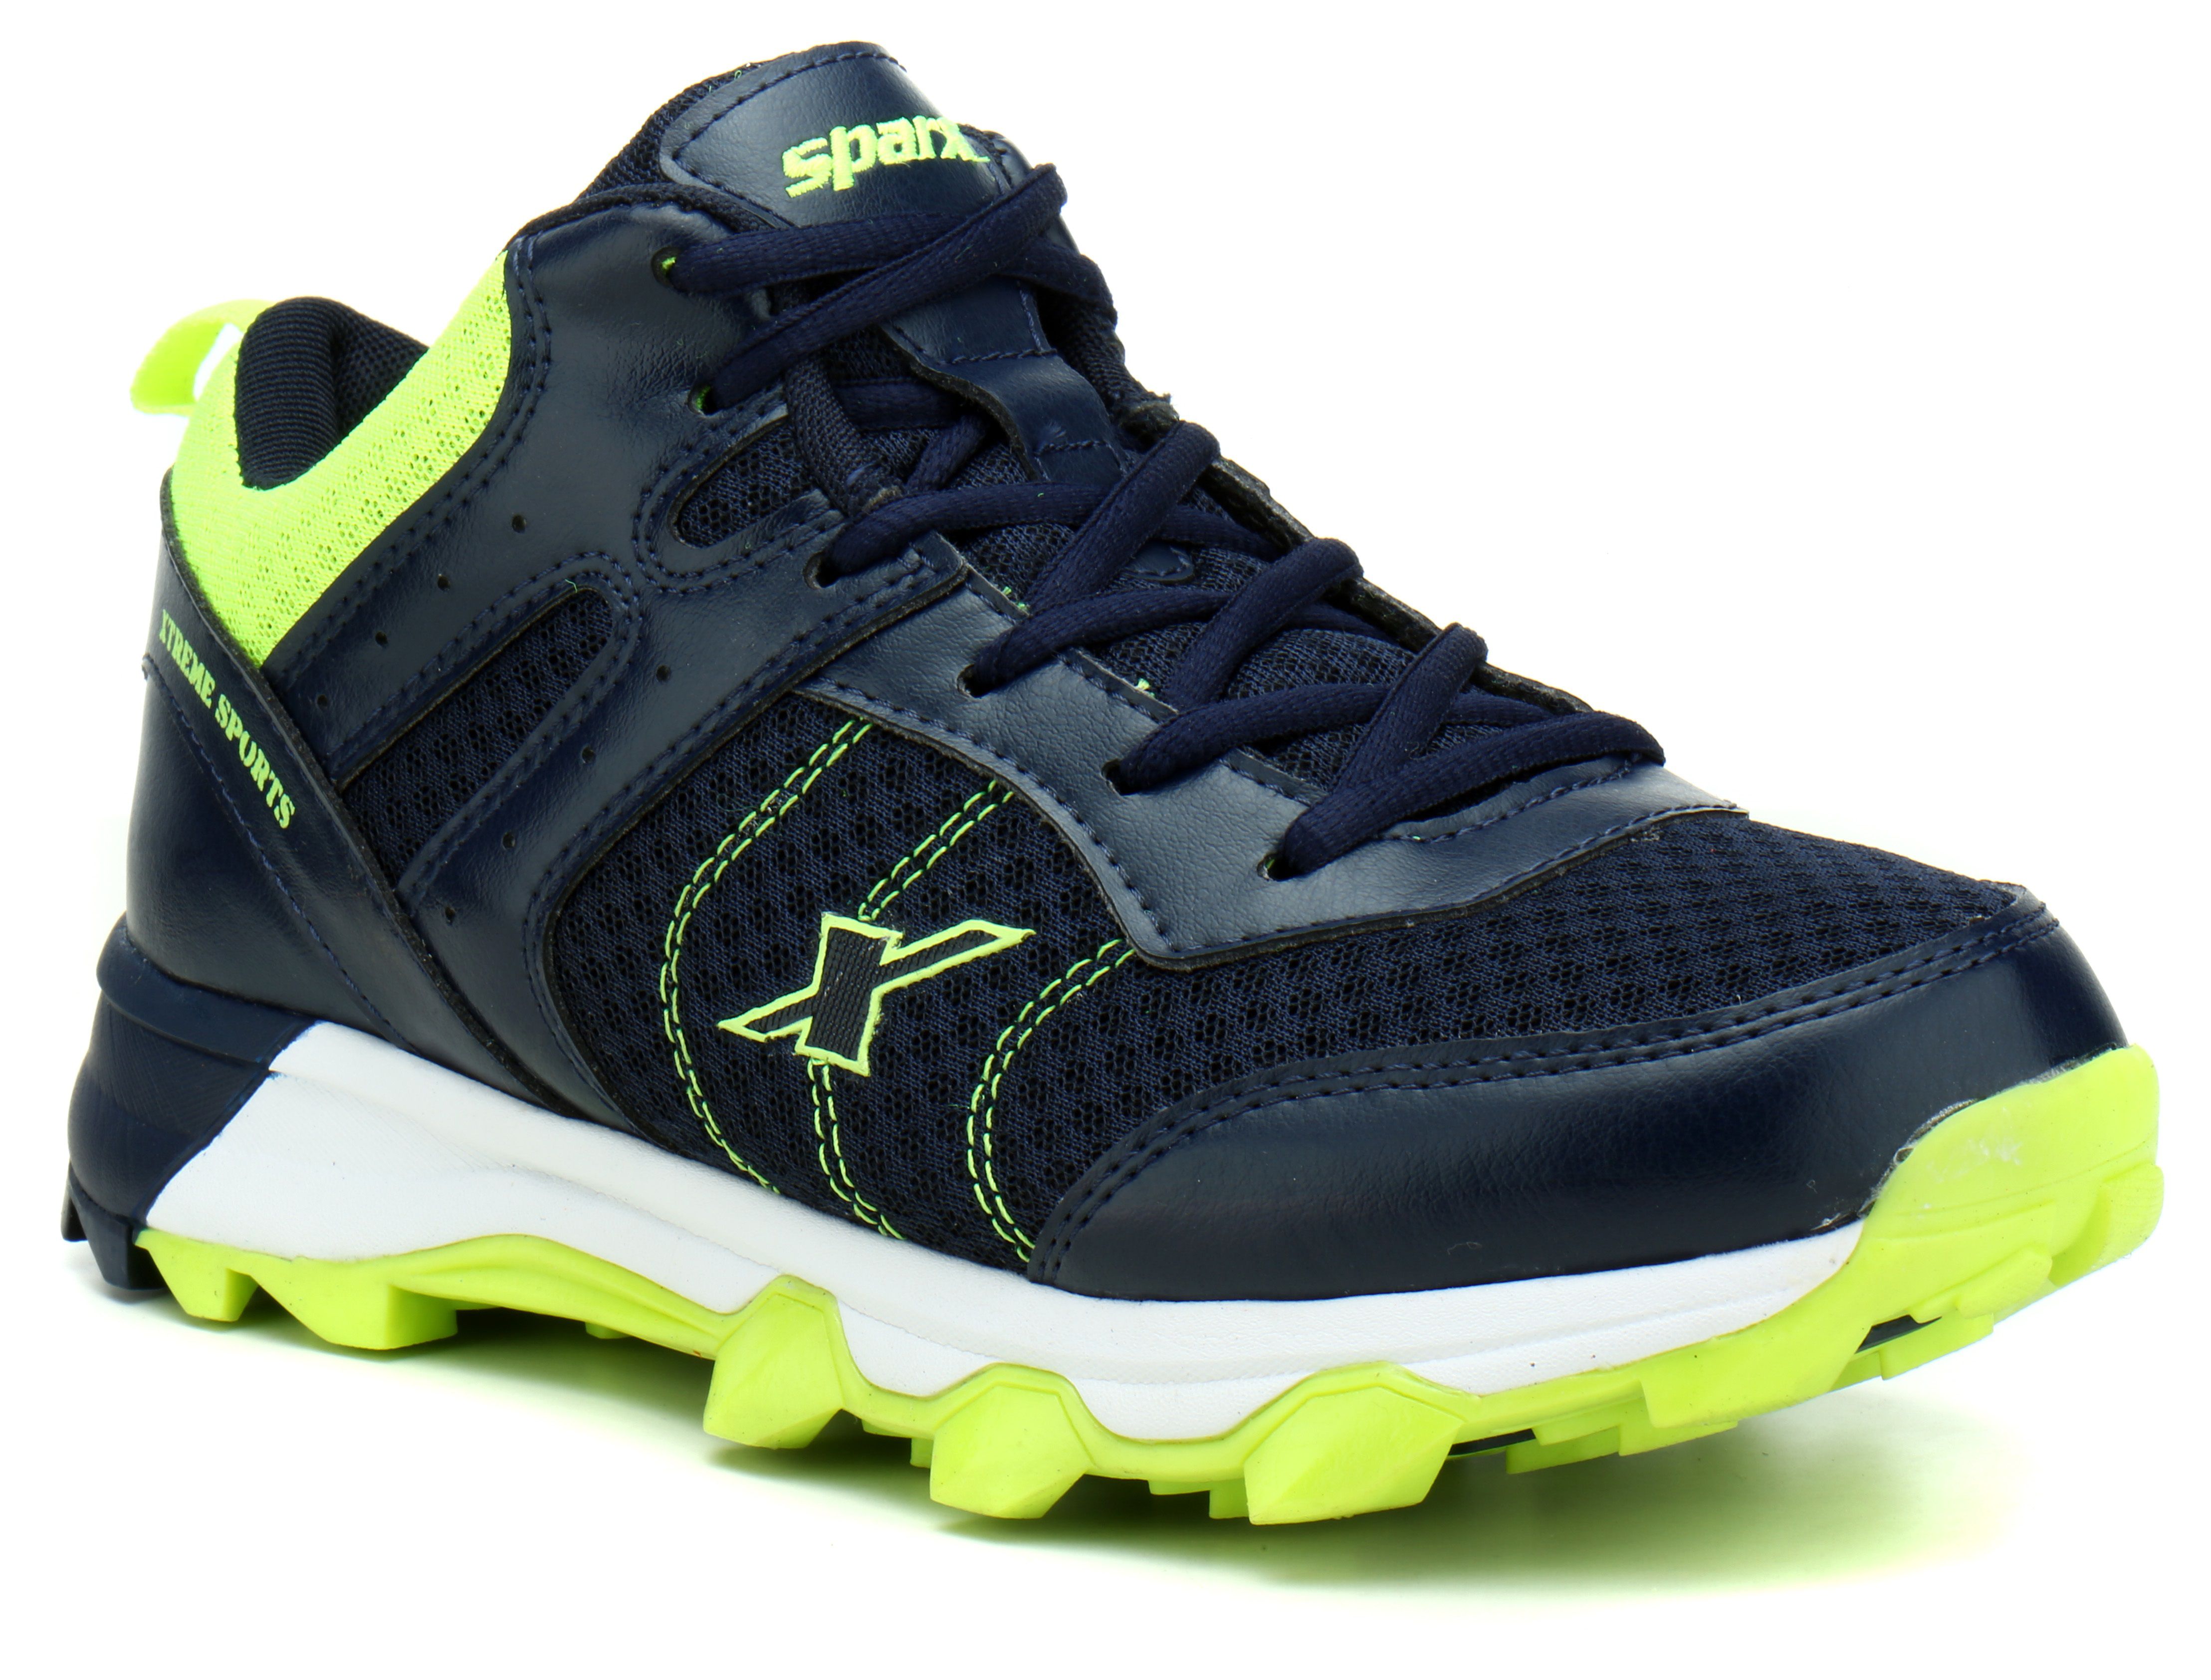 Sparx SM-319 Navy Running Shoes - Buy Sparx SM-319 Navy Running Shoes ...